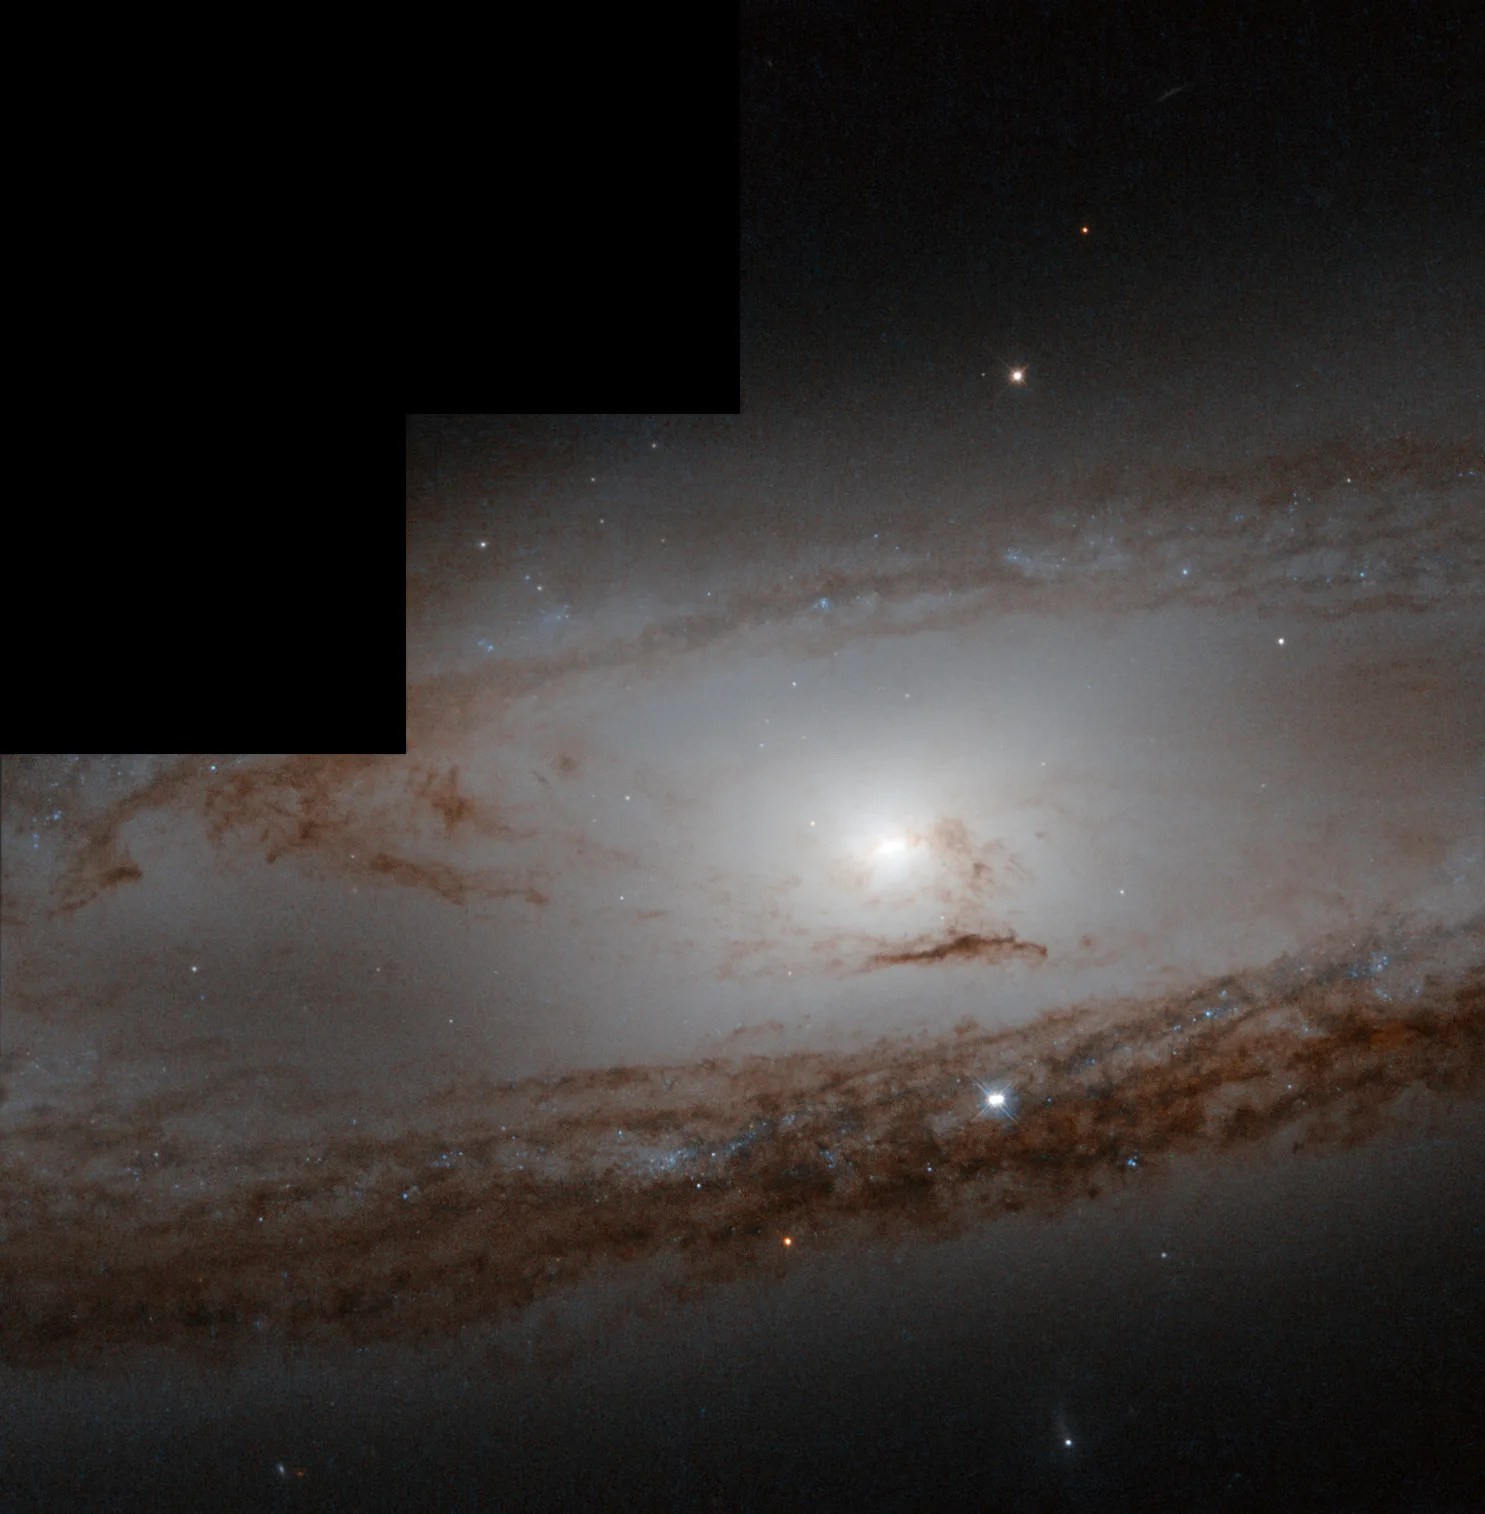 A spiral galaxy with a bright core fills the image, surrounded by faint spiral arms laced through with dark dust. A black rectangle is at the upper left, showing a portion where there is no Hubble data.